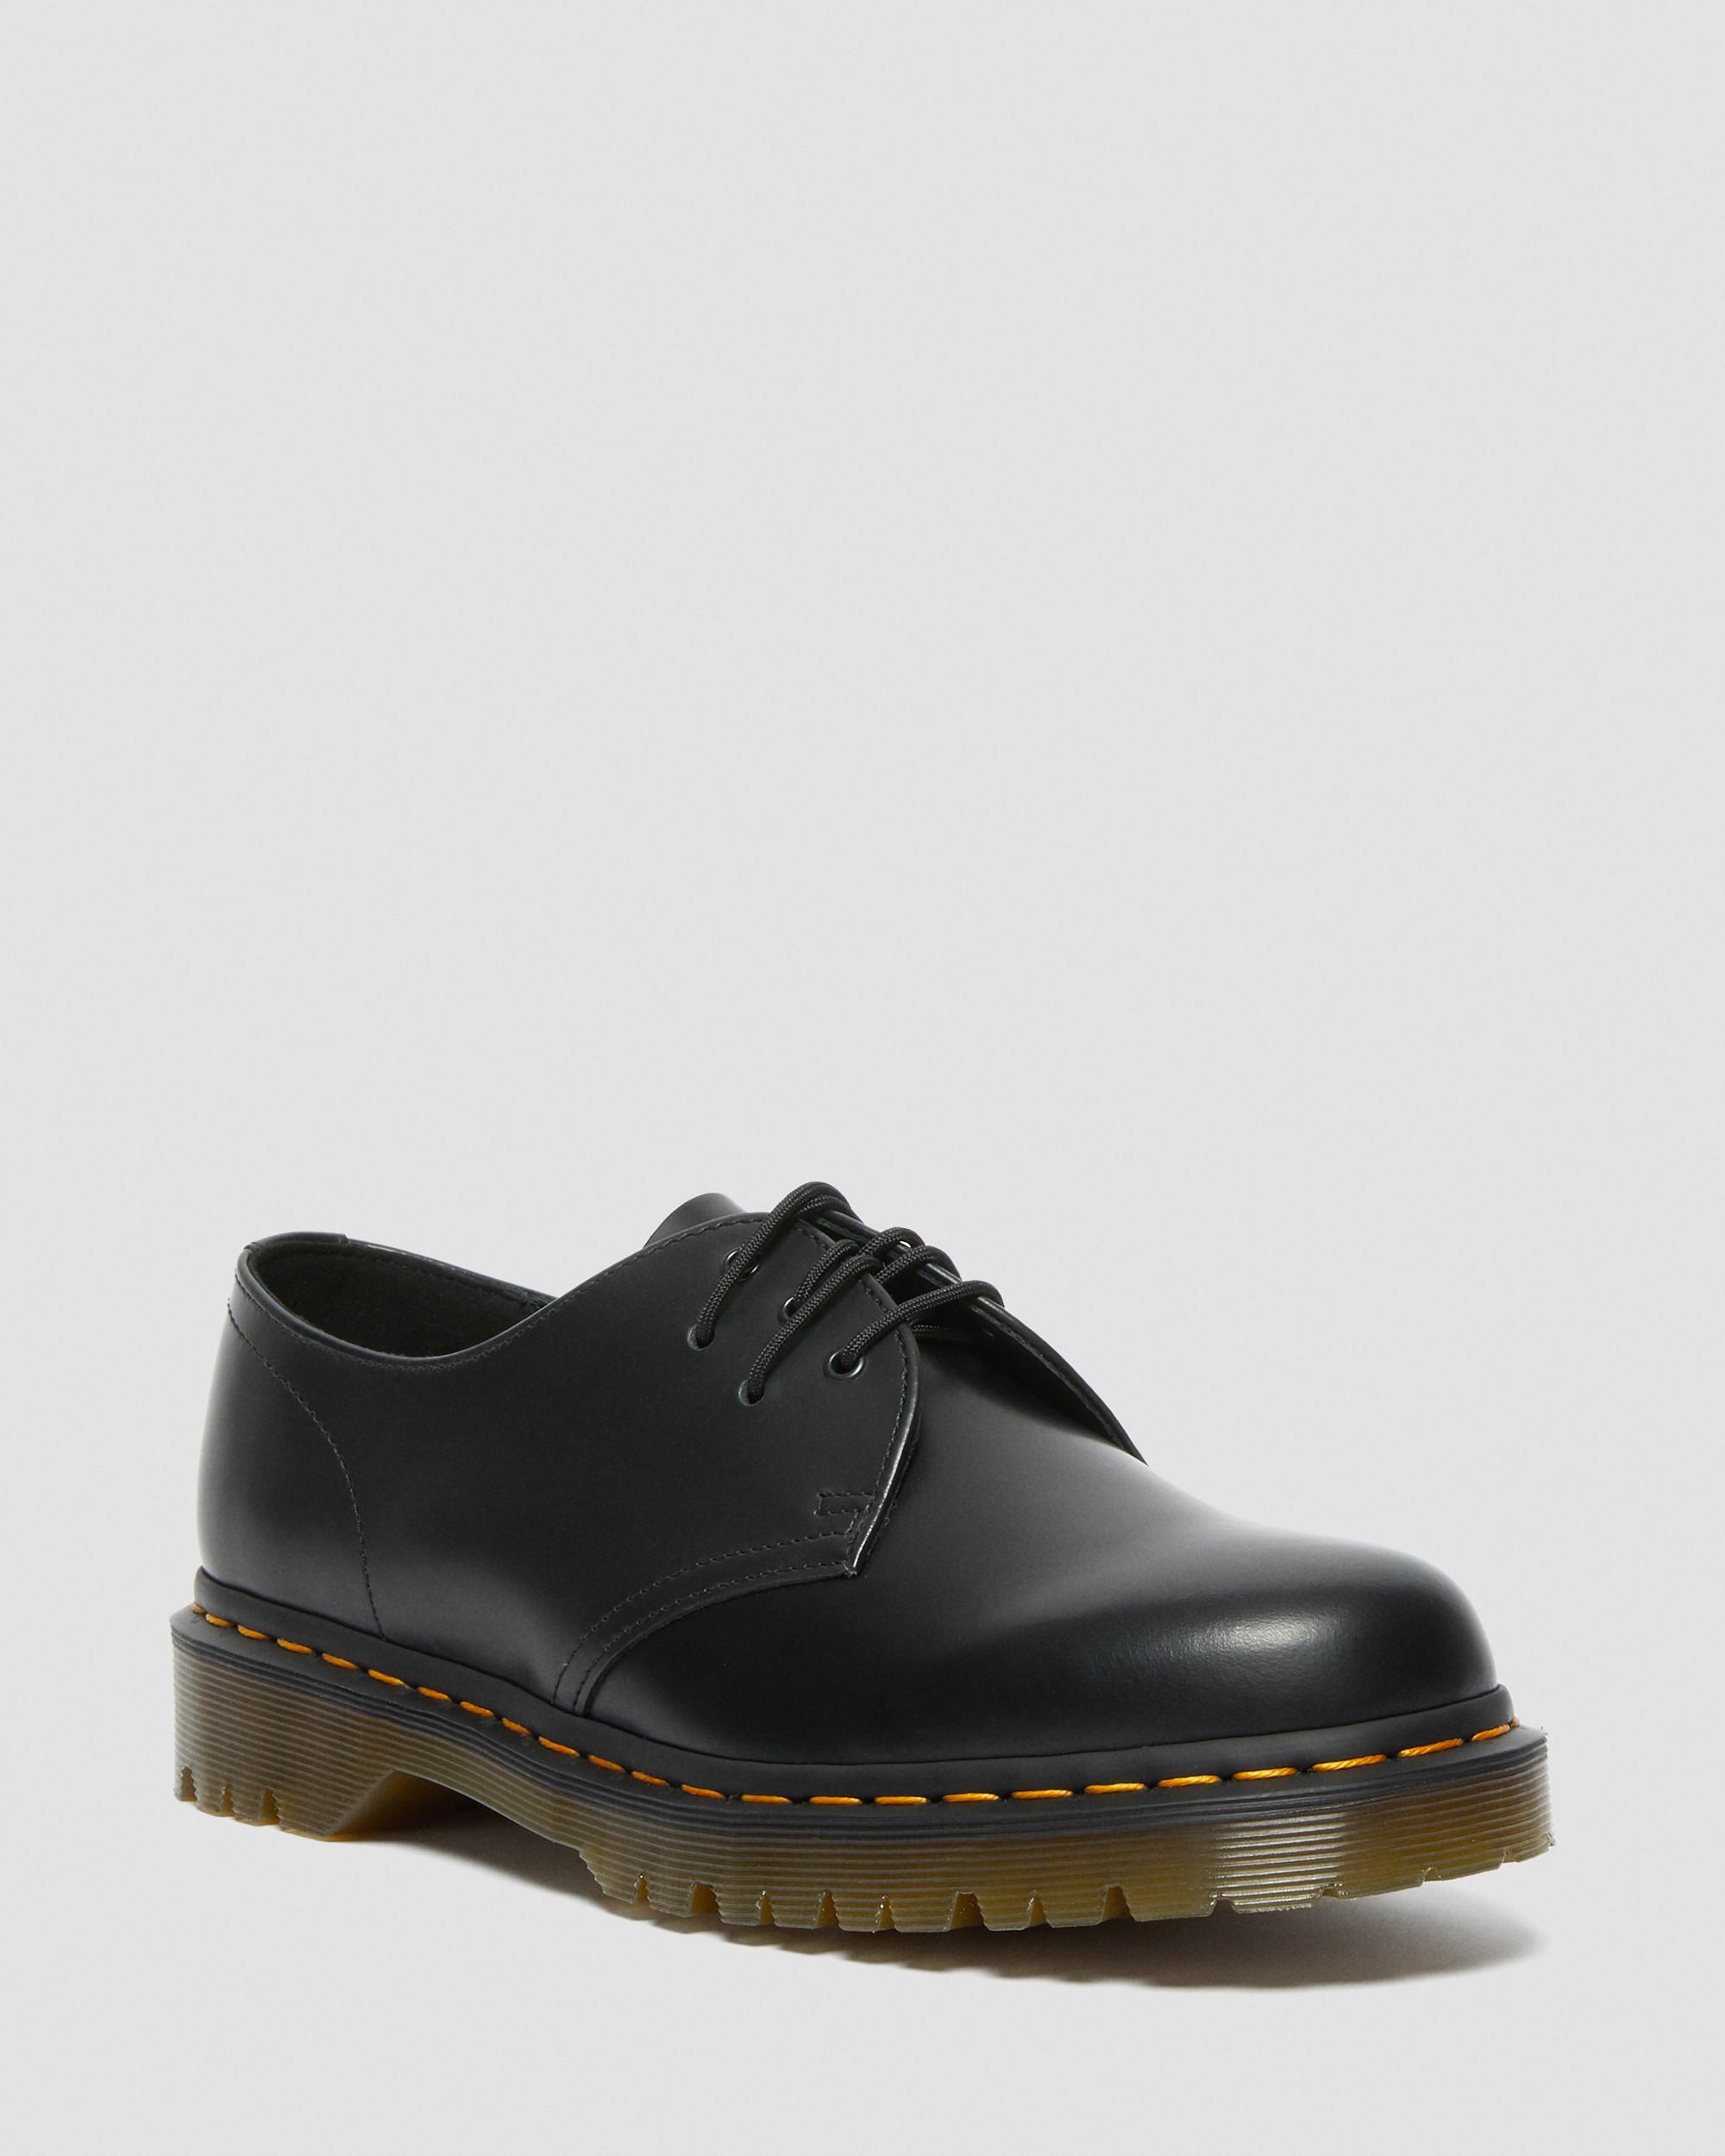 DR MARTENS 1461 Extreme Lace Leather Oxford Shoes | ubicaciondepersonas ...